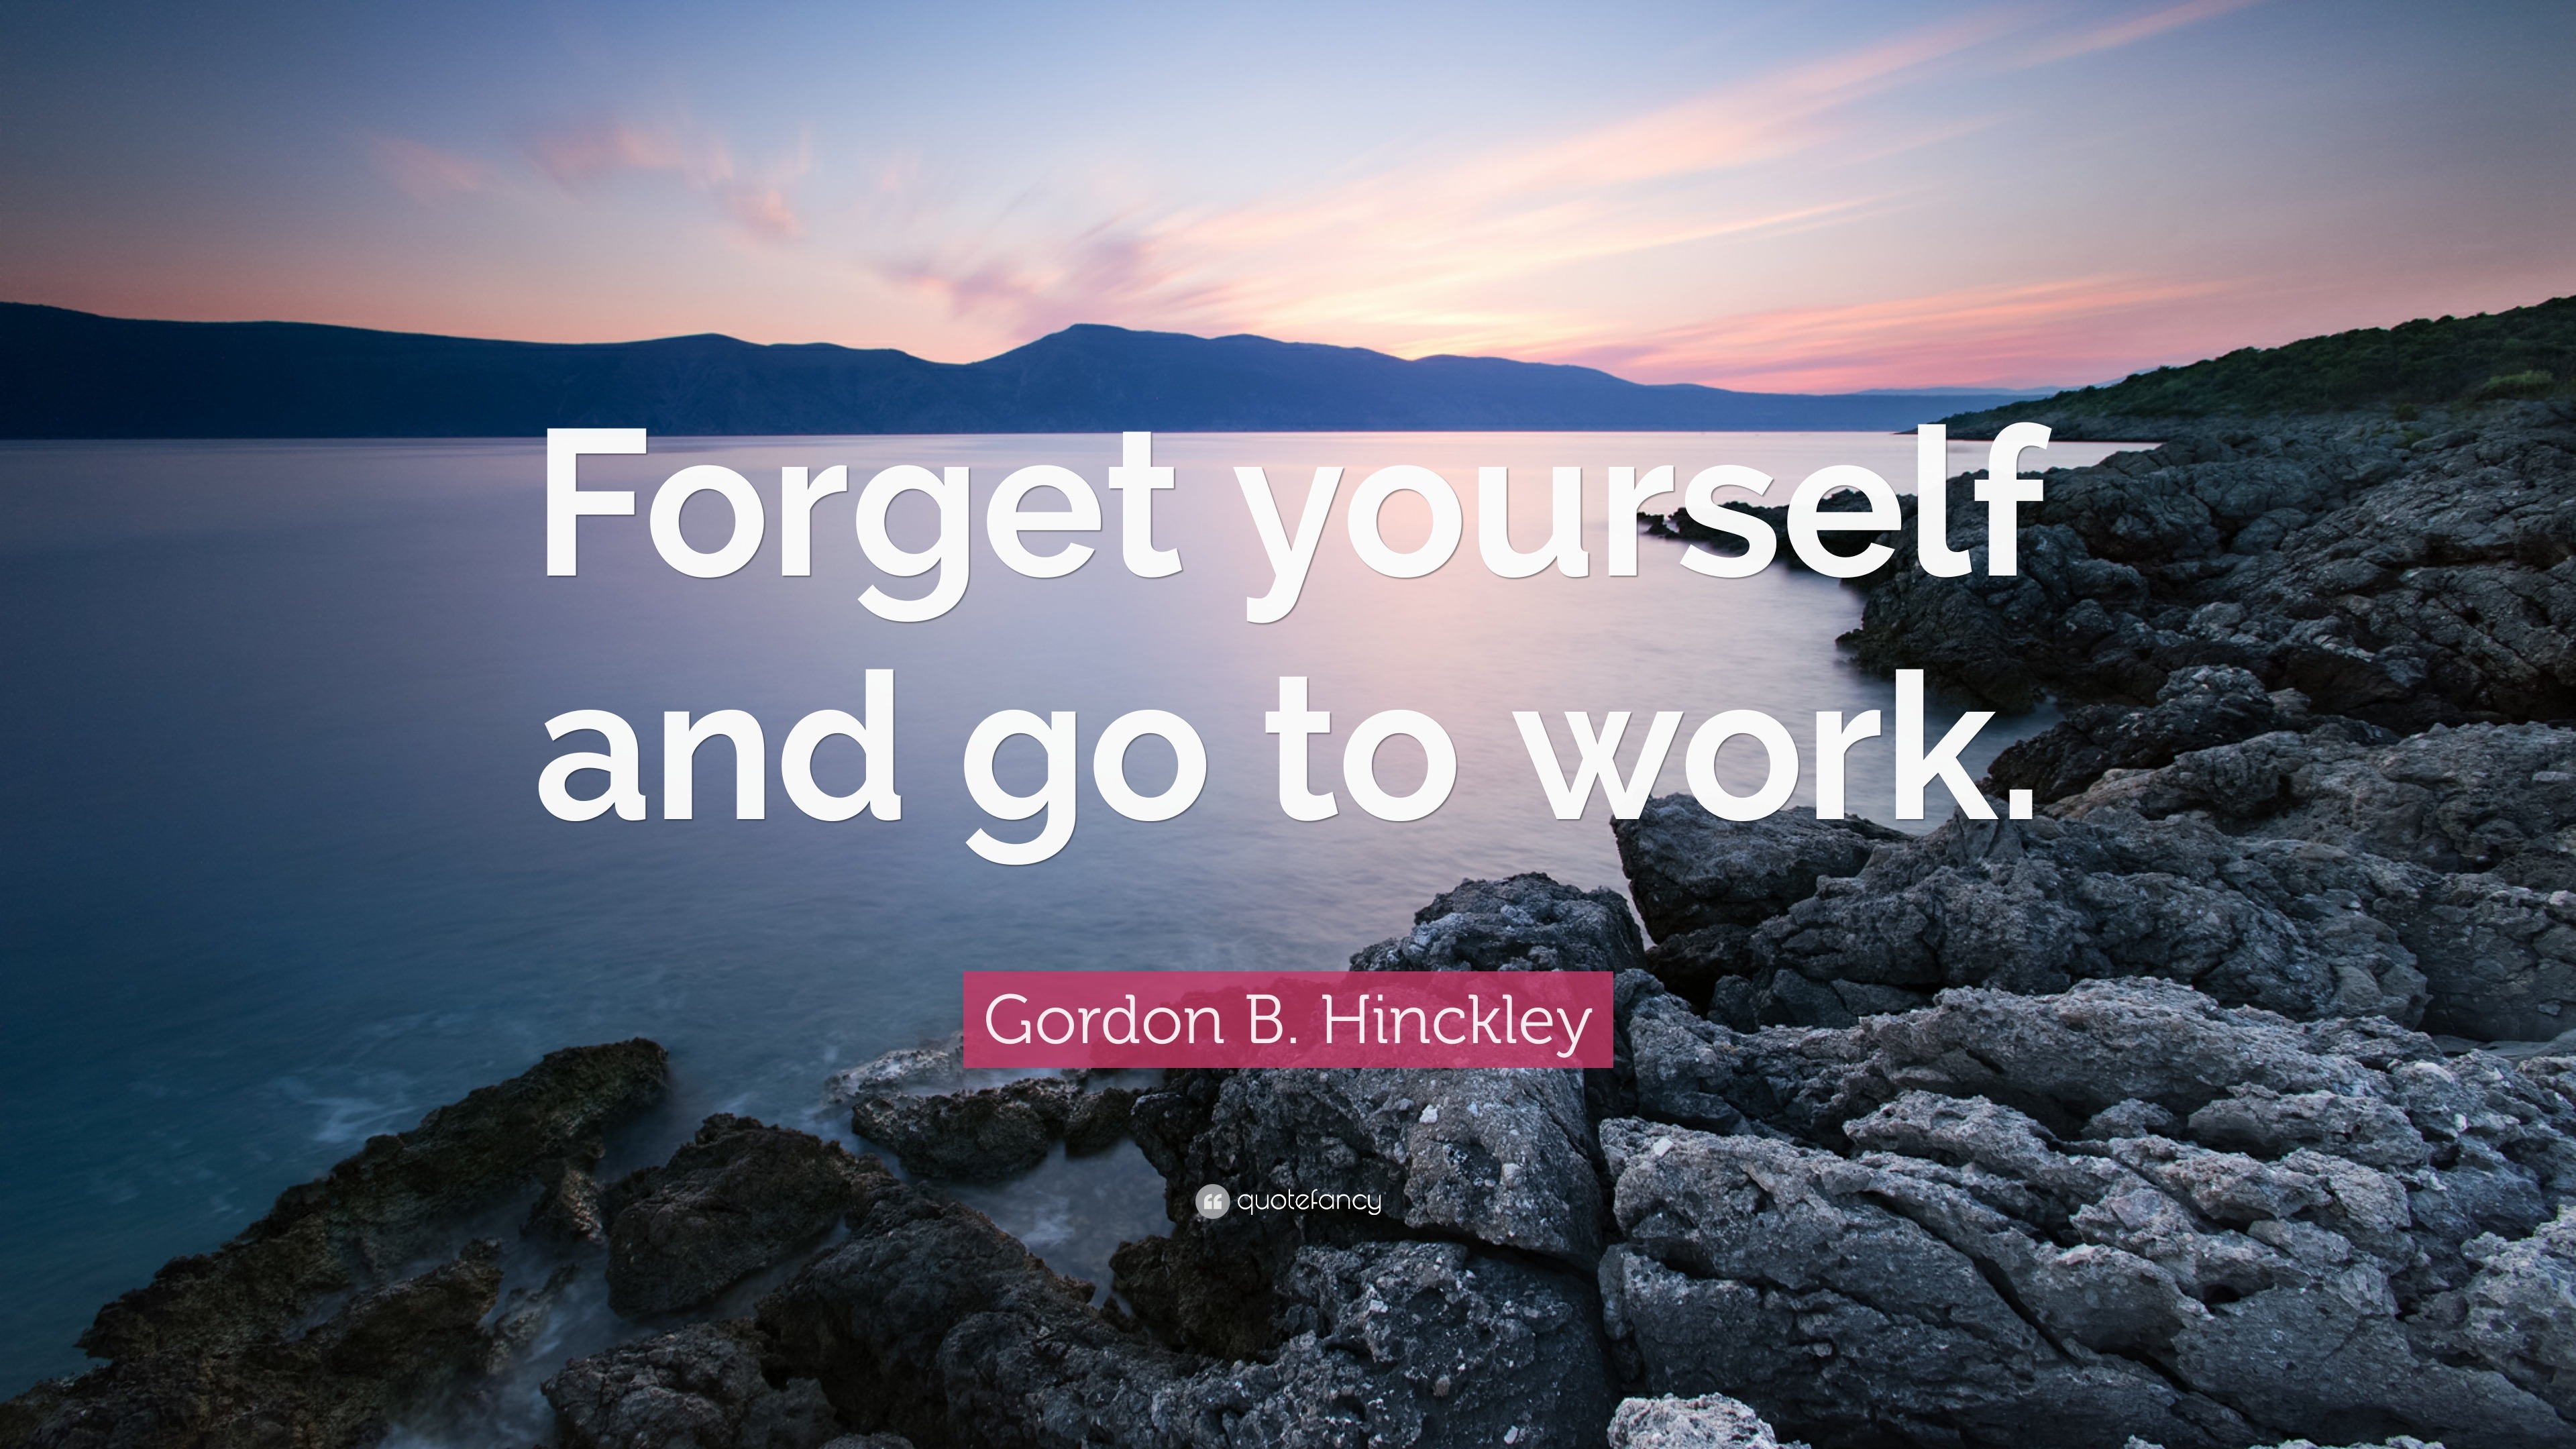 Gordon B. Hinckley Quote: “Forget yourself and go to work.” (12